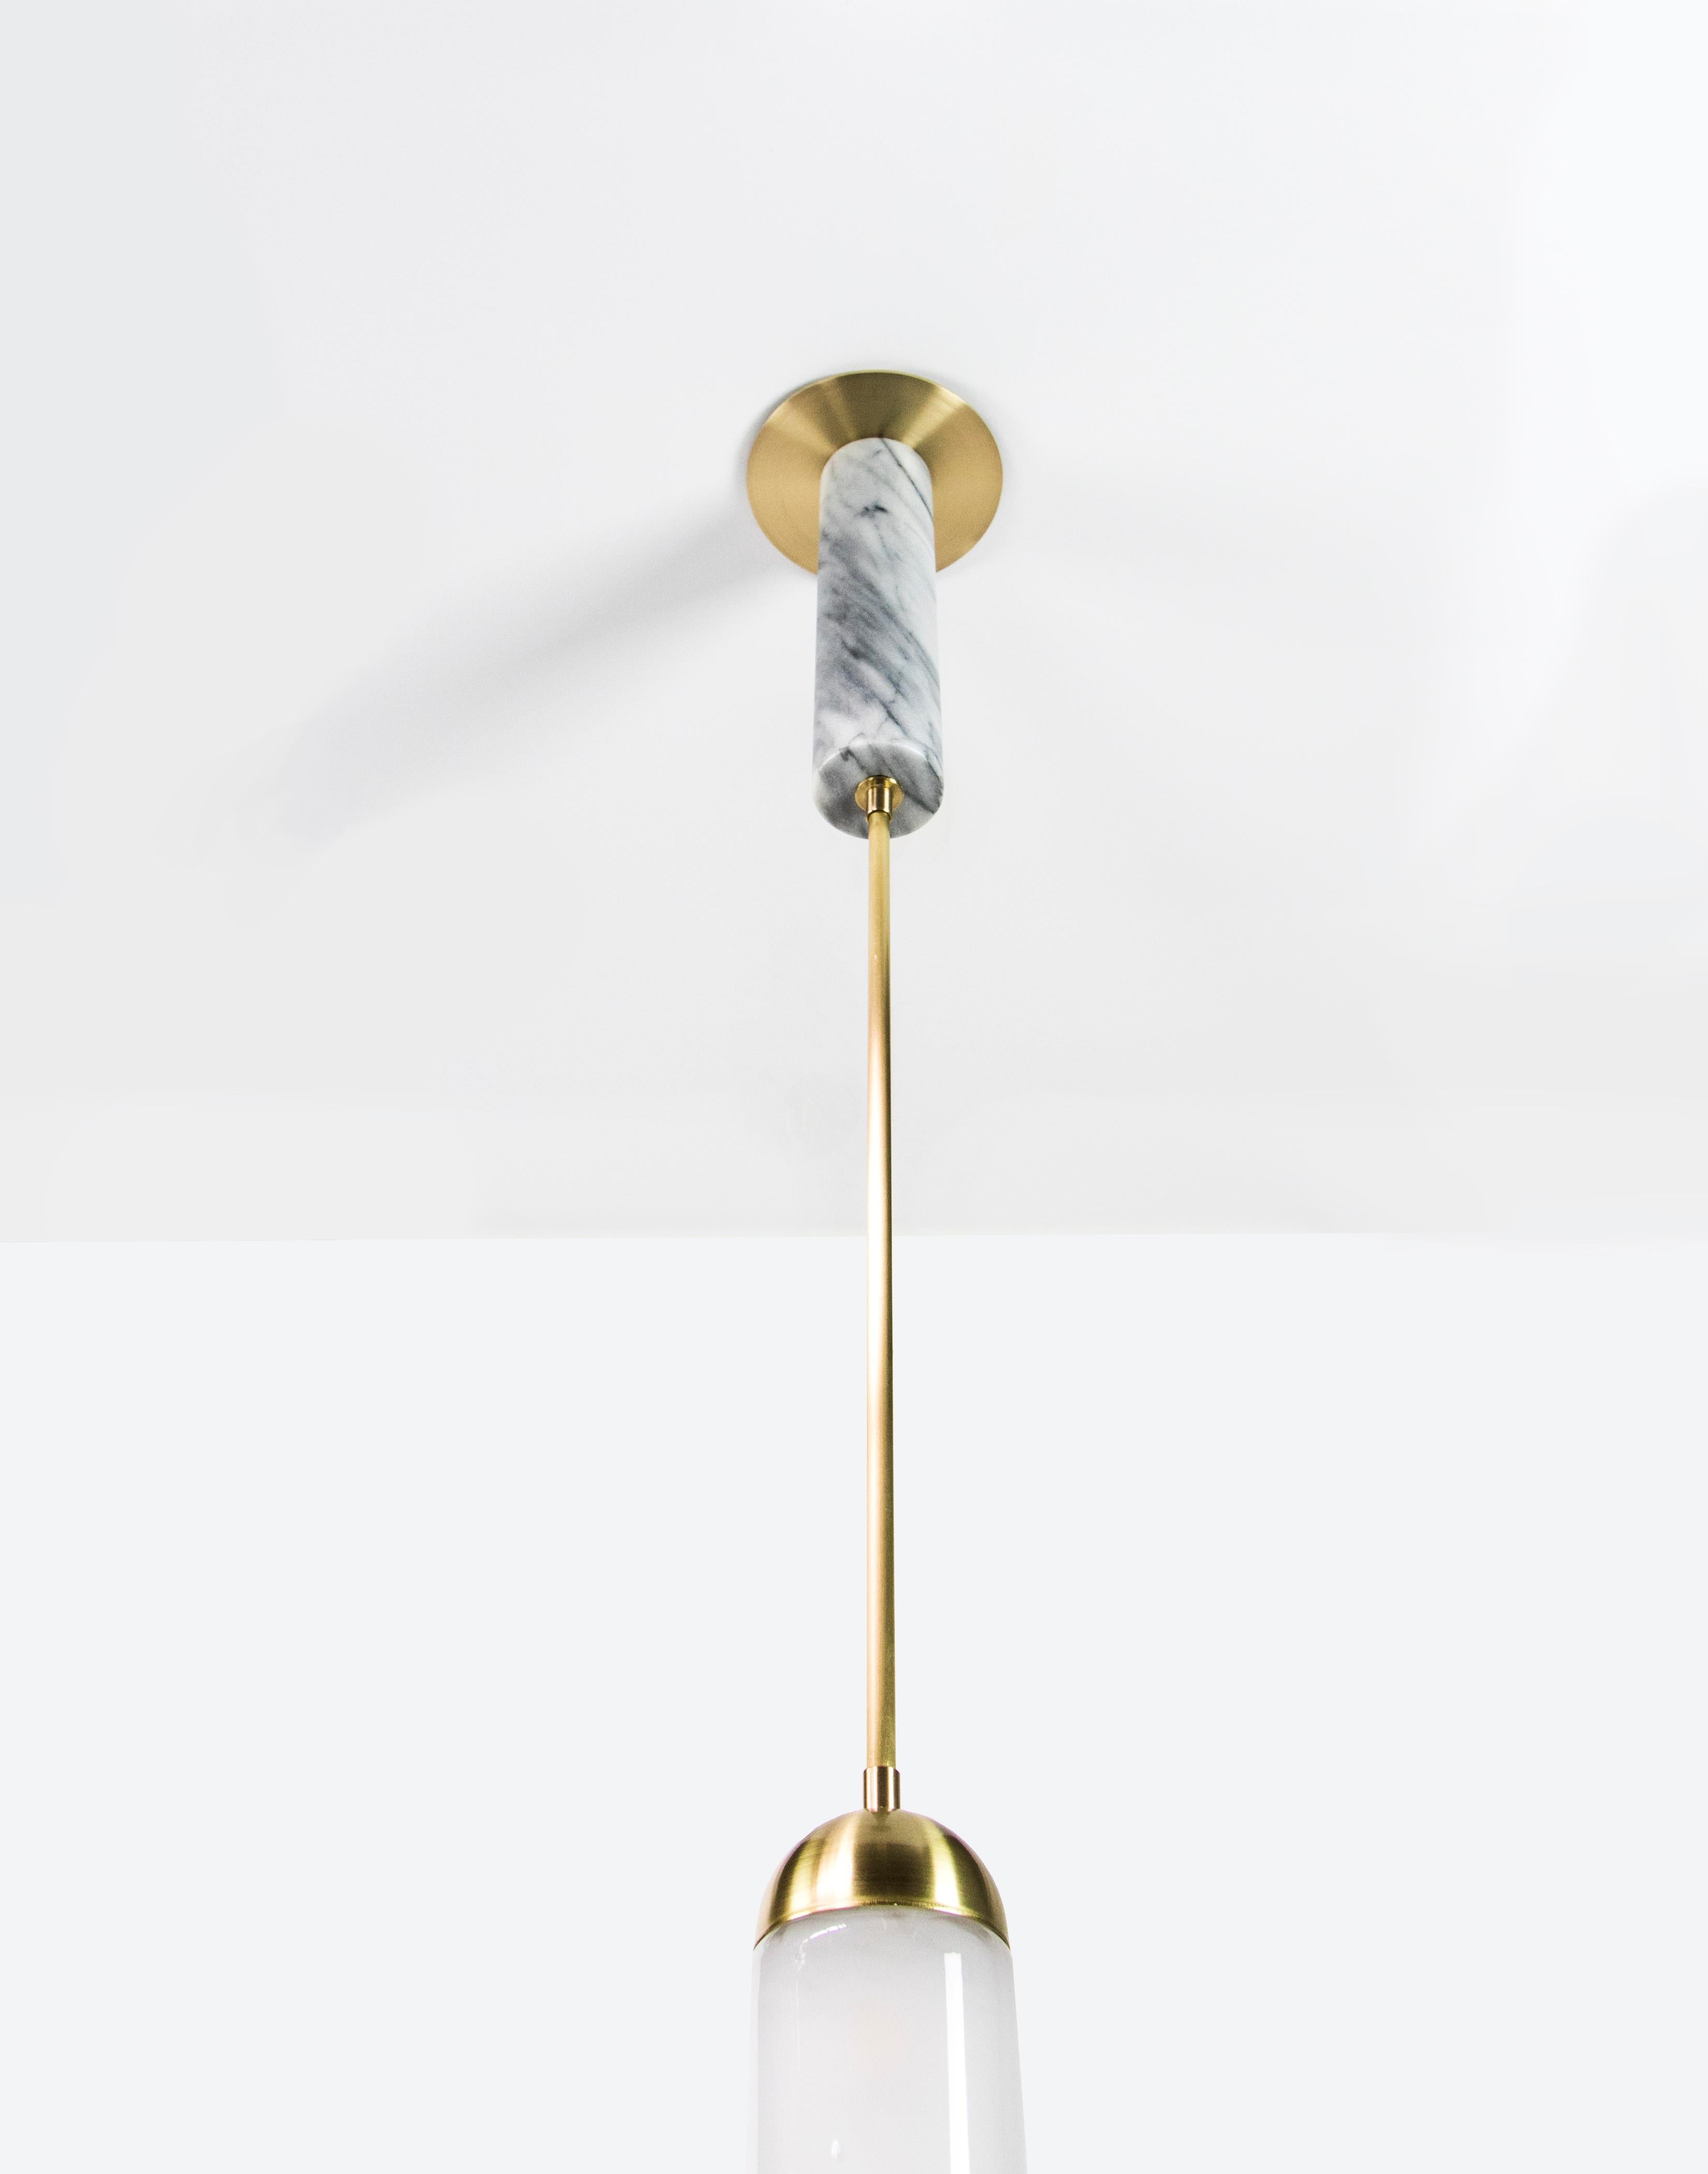 Meridian Single, Capsule Contemporary Pendant, Handblown Glass, Brass, Marble In New Condition For Sale In Savannah, GA